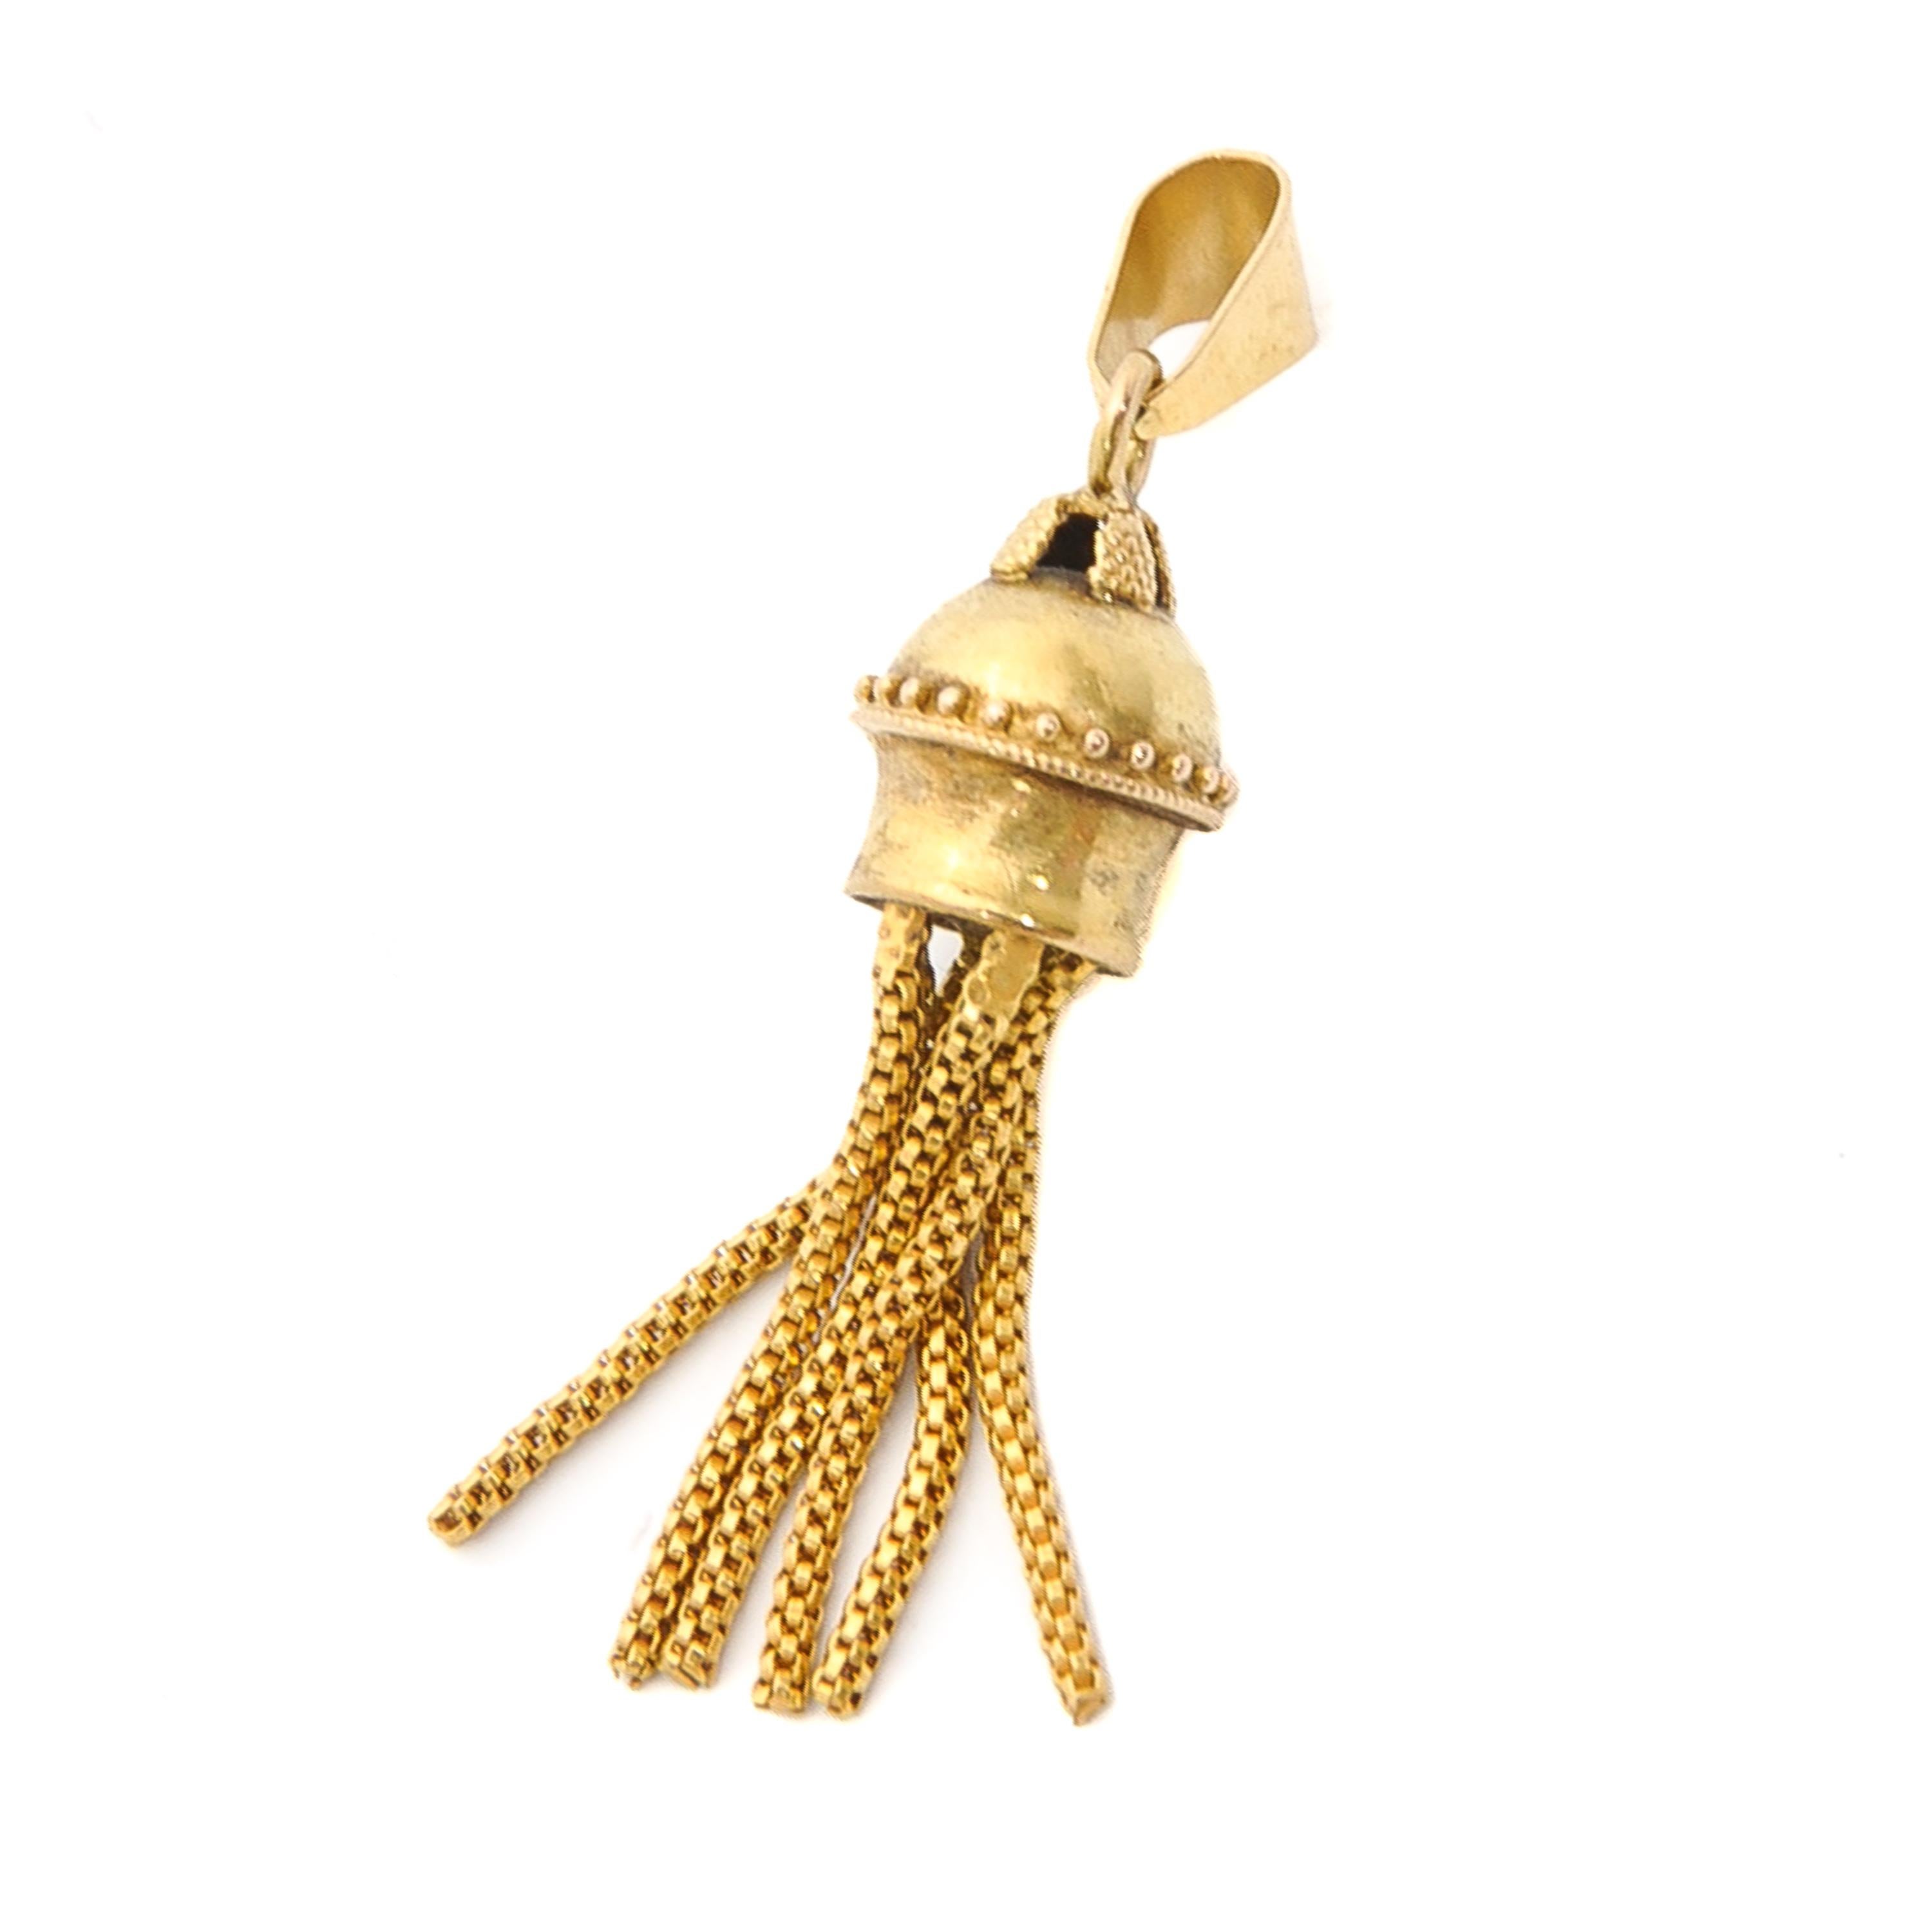 This antique 14 karat yellow gold pendant features six tassels below the top, also called a 'foxtail'. At the top of the pendant the gold is decorated with fine granulation. Lovely piece.

The gold has the purity hallmark
Stamped: 14k
Length: 3.8 cm